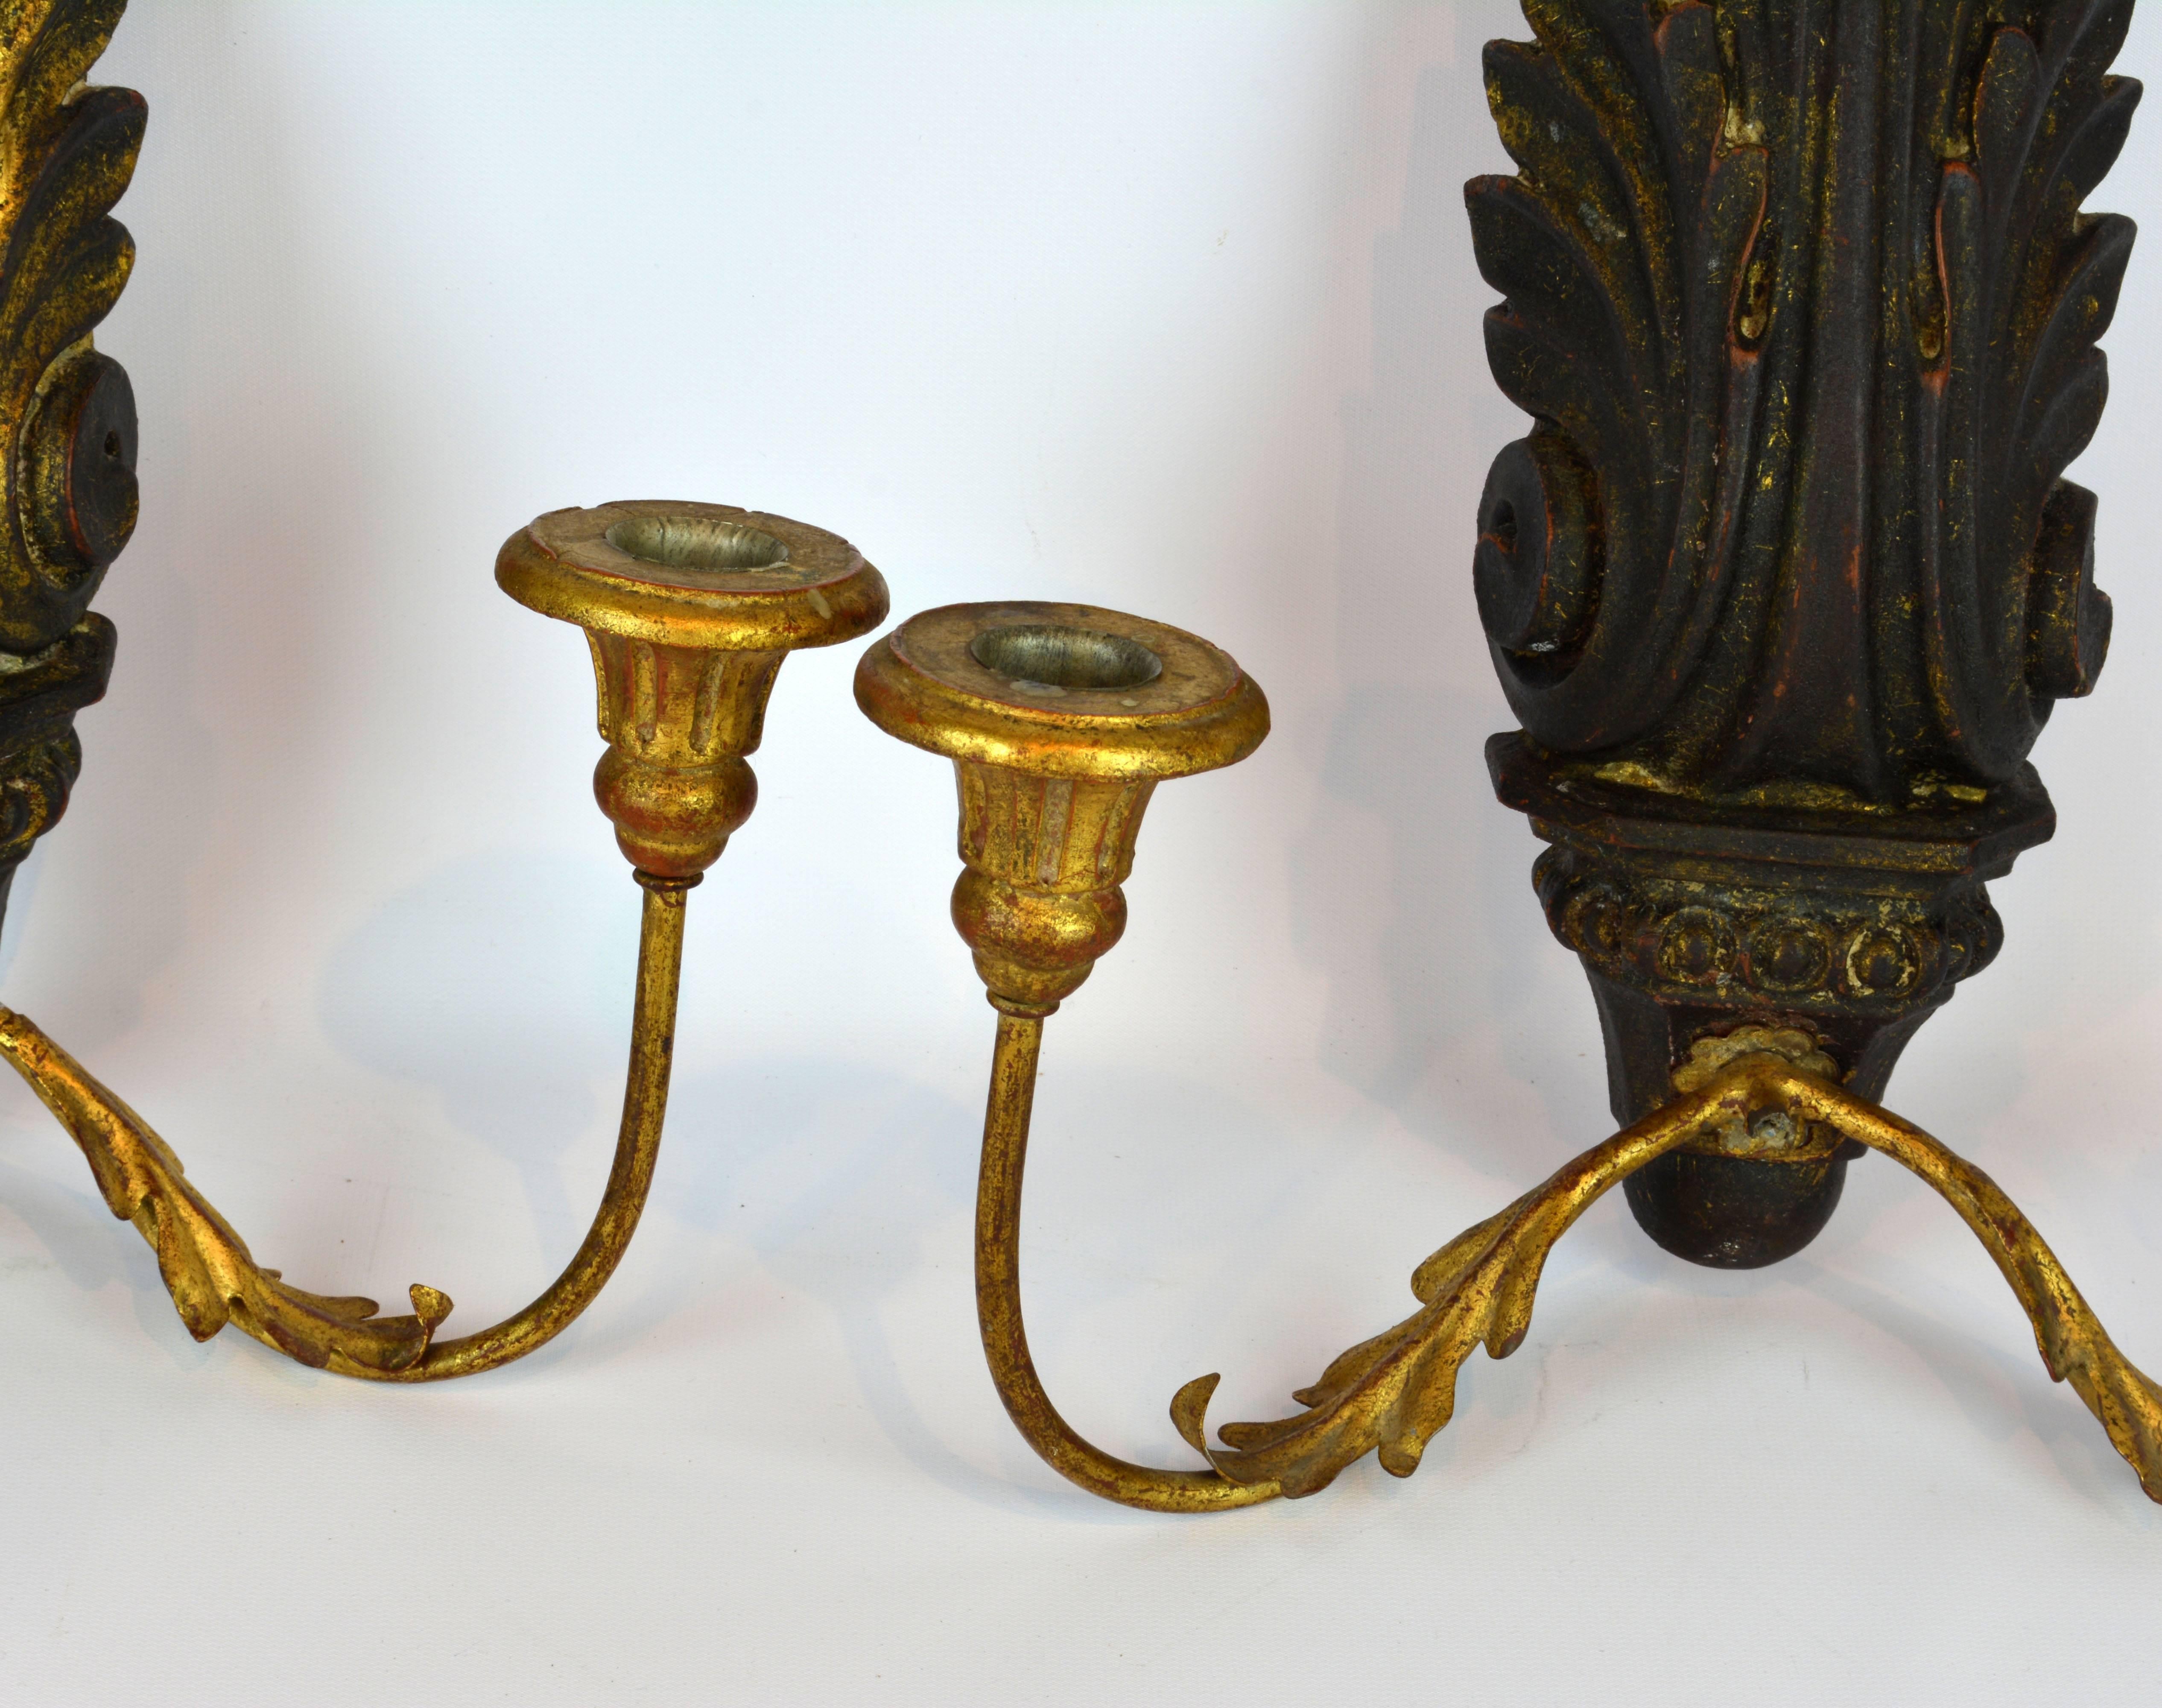 20th Century Pair of Italian 1950s Palladio Wood and Gilt Iron Neoclassical Wall Sconce